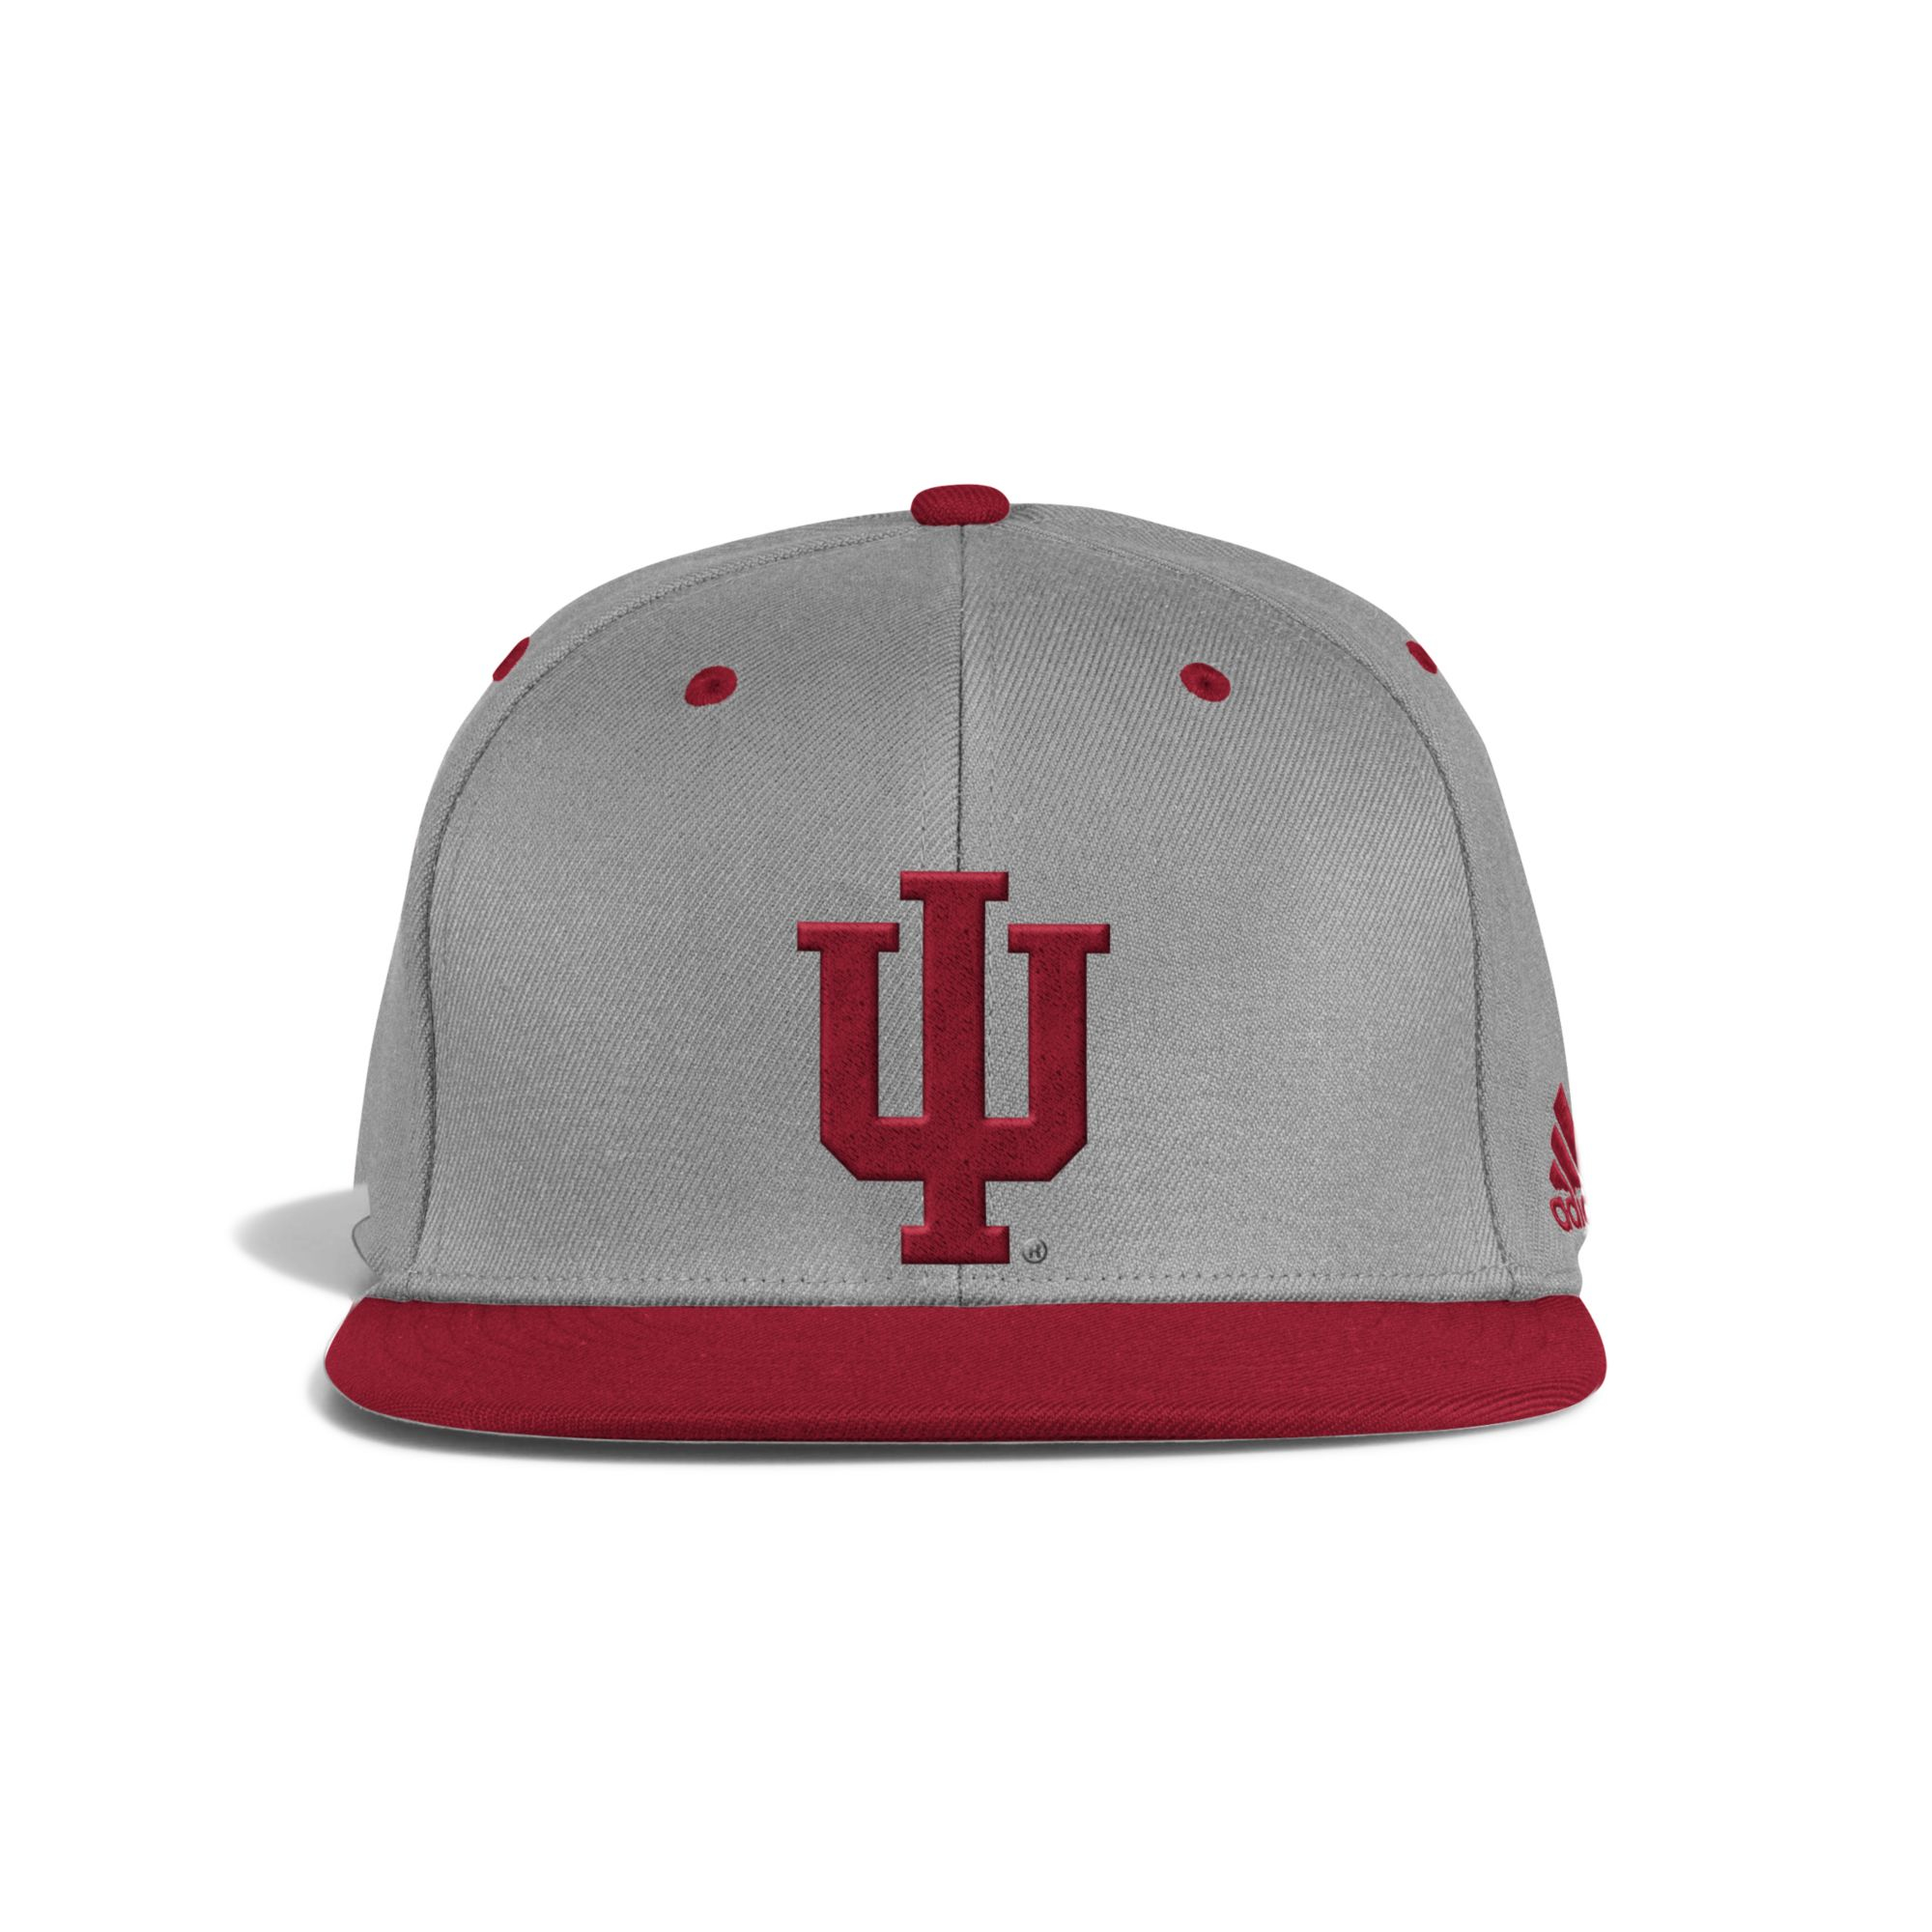 adidas Men's Grey Indiana Hoosiers Fitted Wool Baseball Hat, Size 7 5/8, Gray